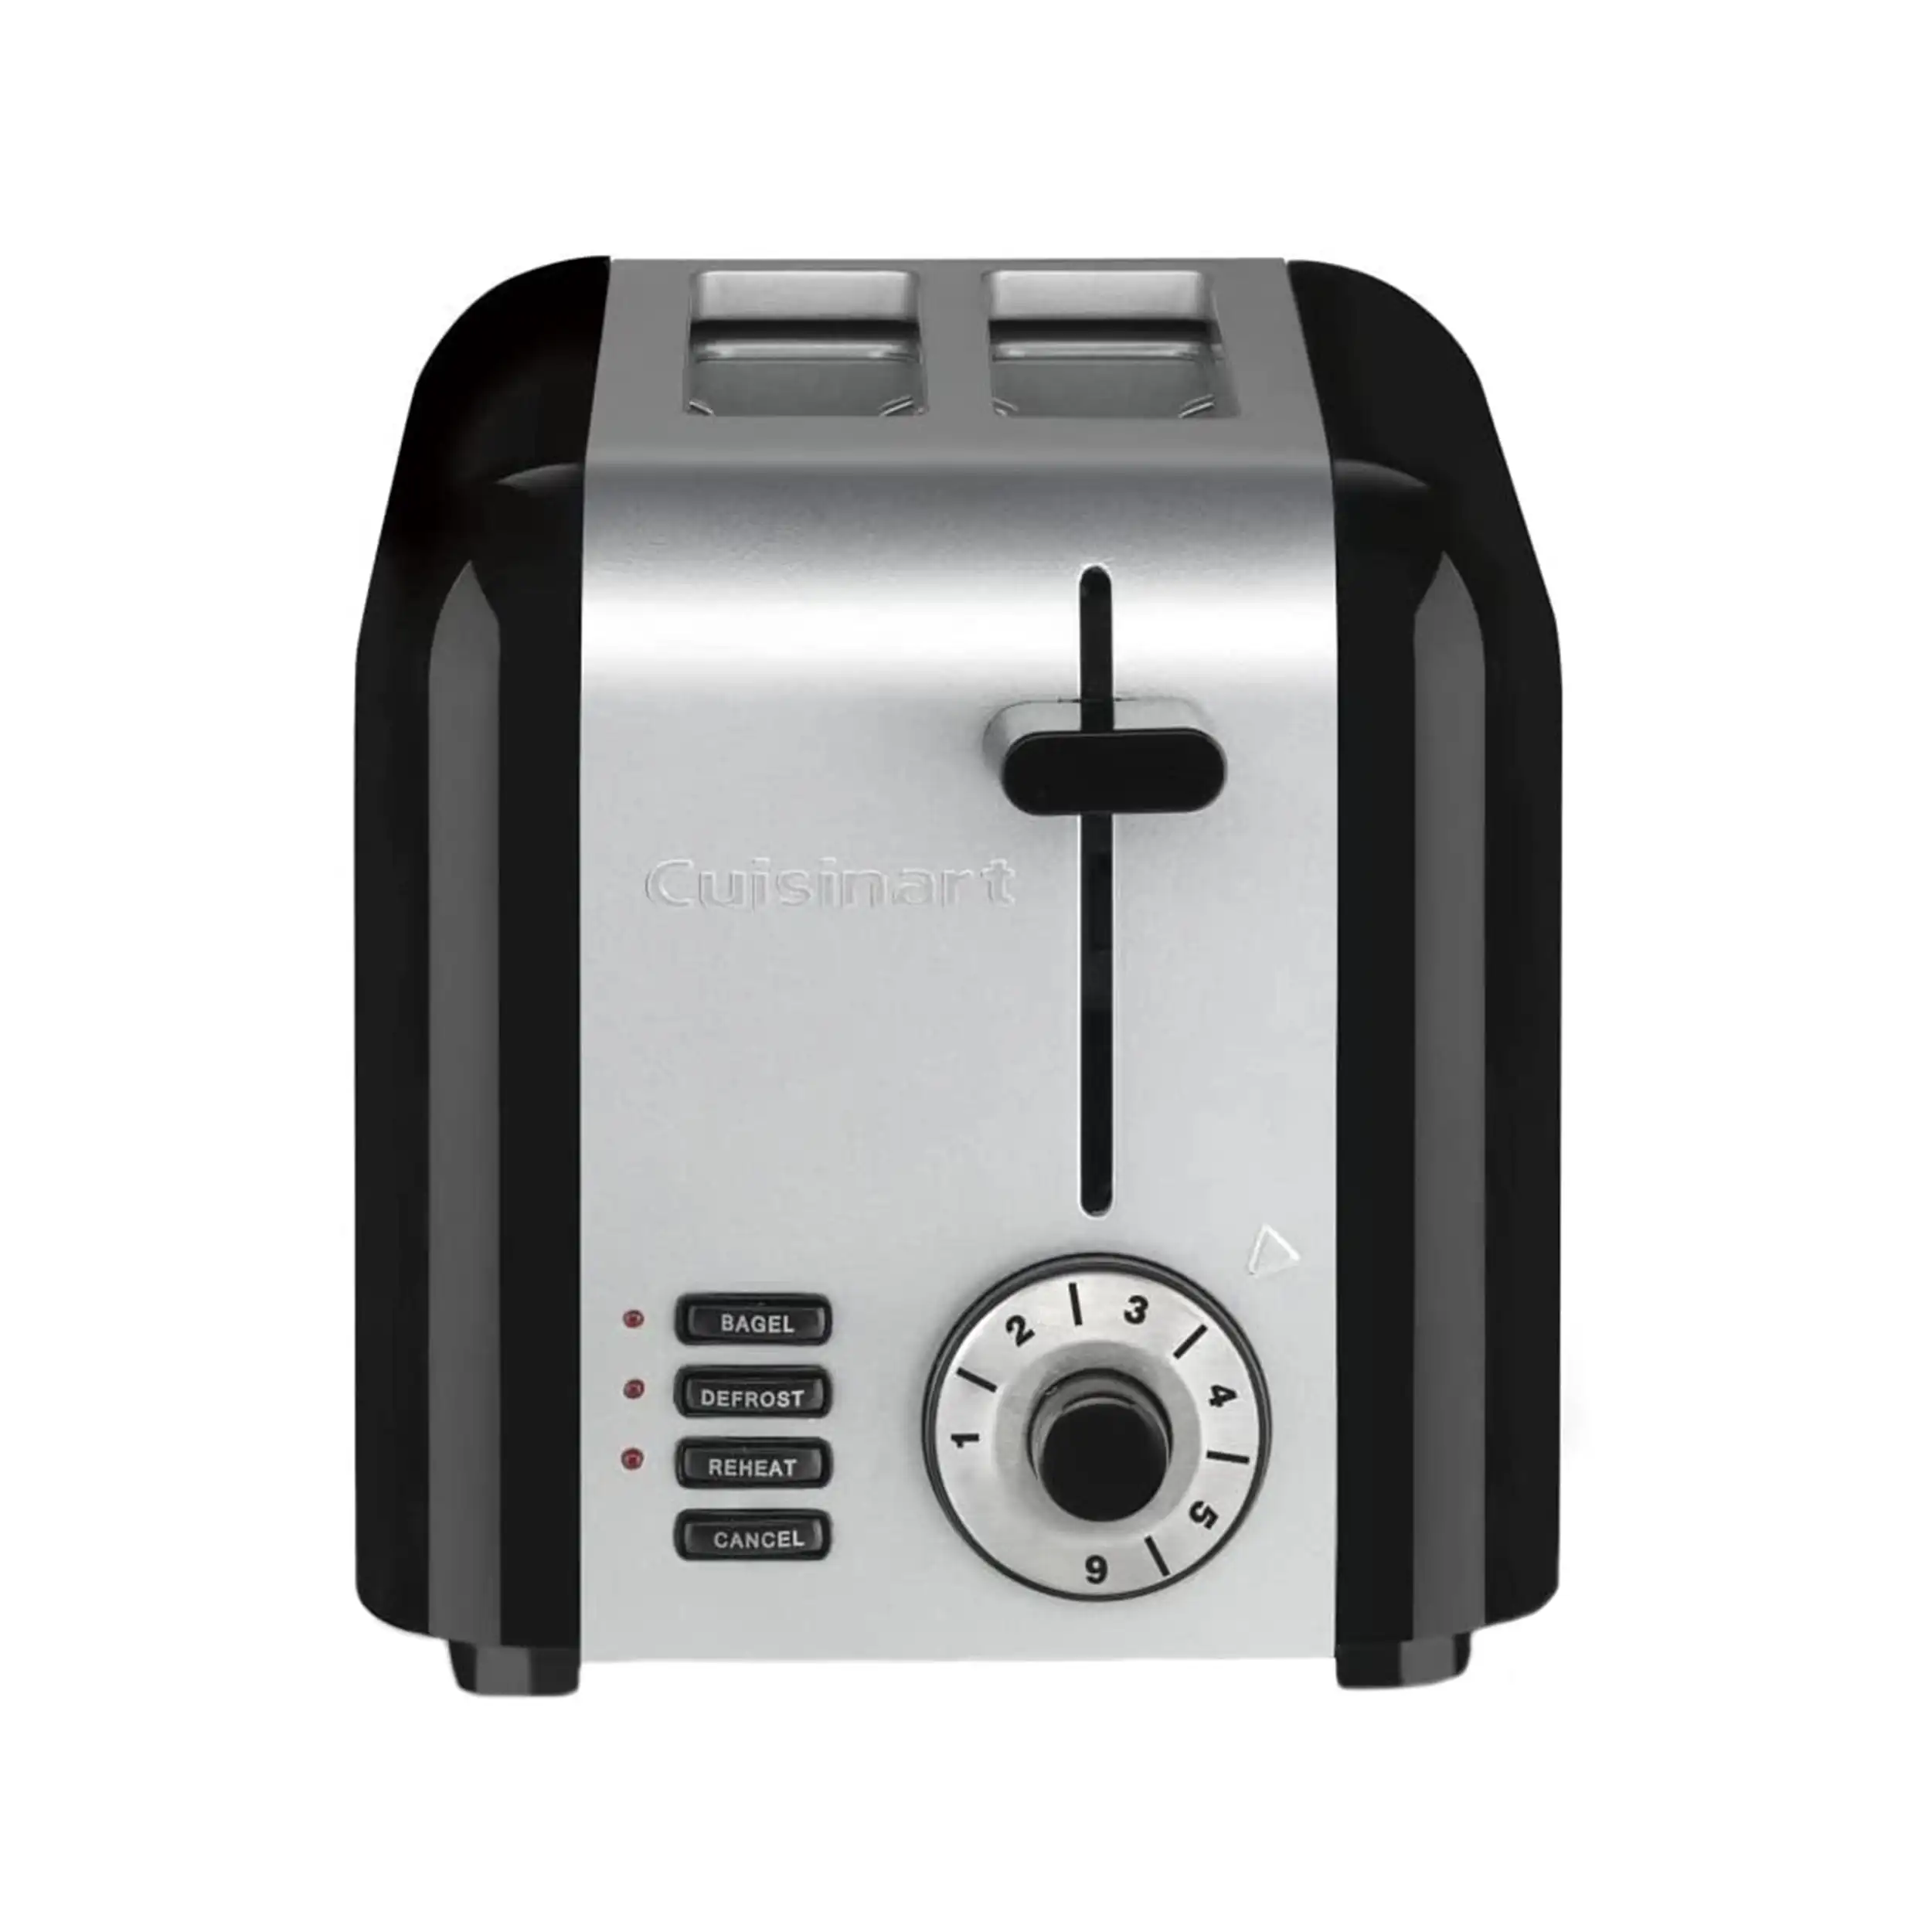 

Cuisinart Toasters 2 Slice Compact Stainless Toaster